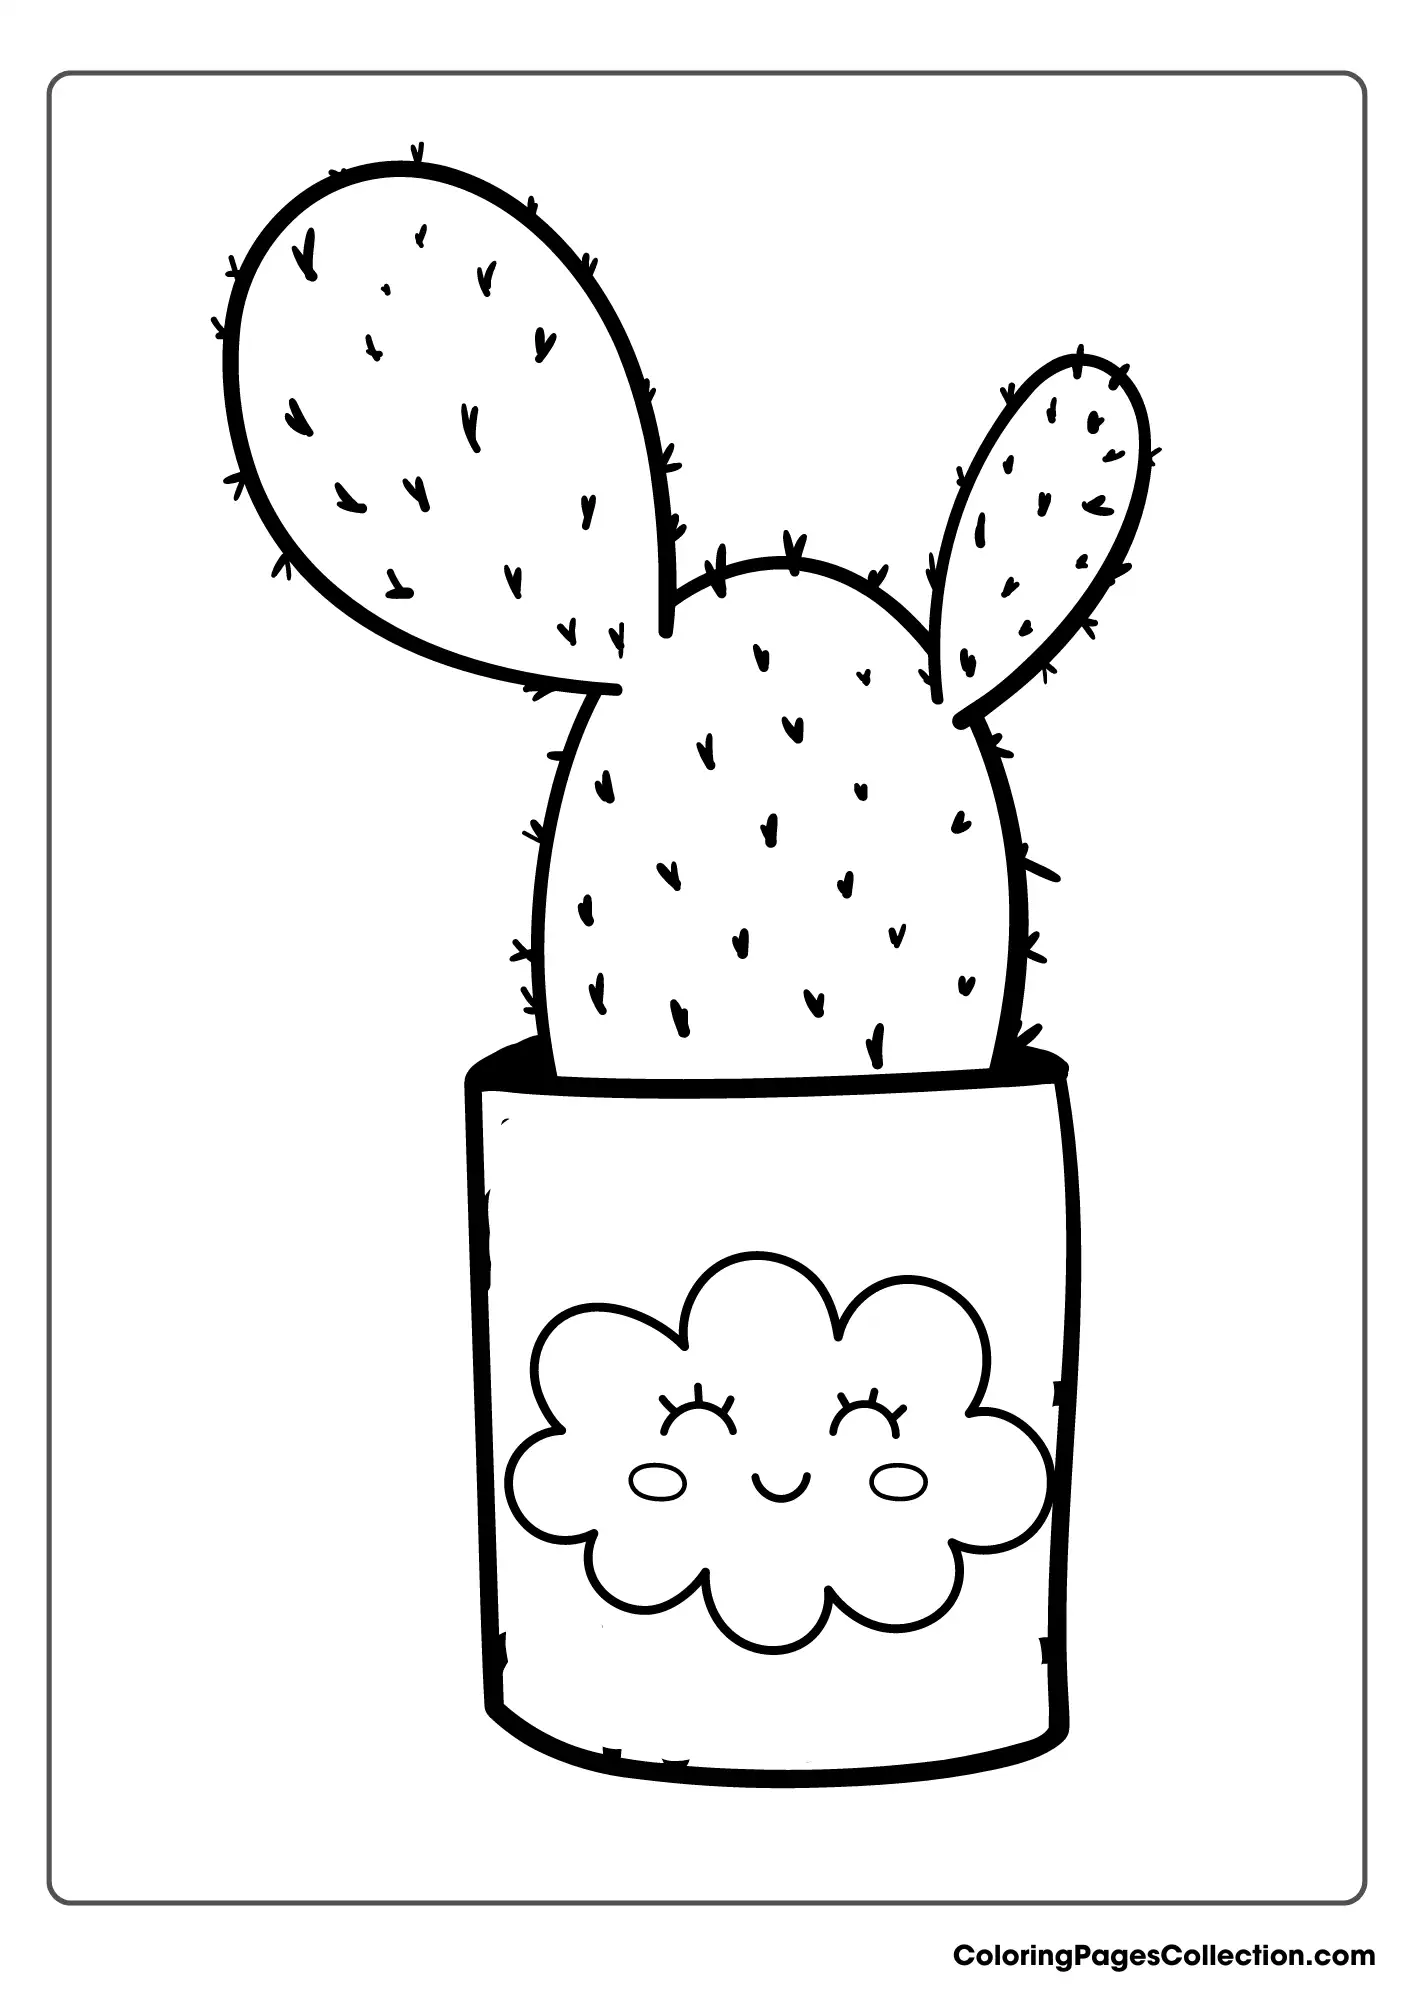 A Coloring Page Of A Cactus In A Pot